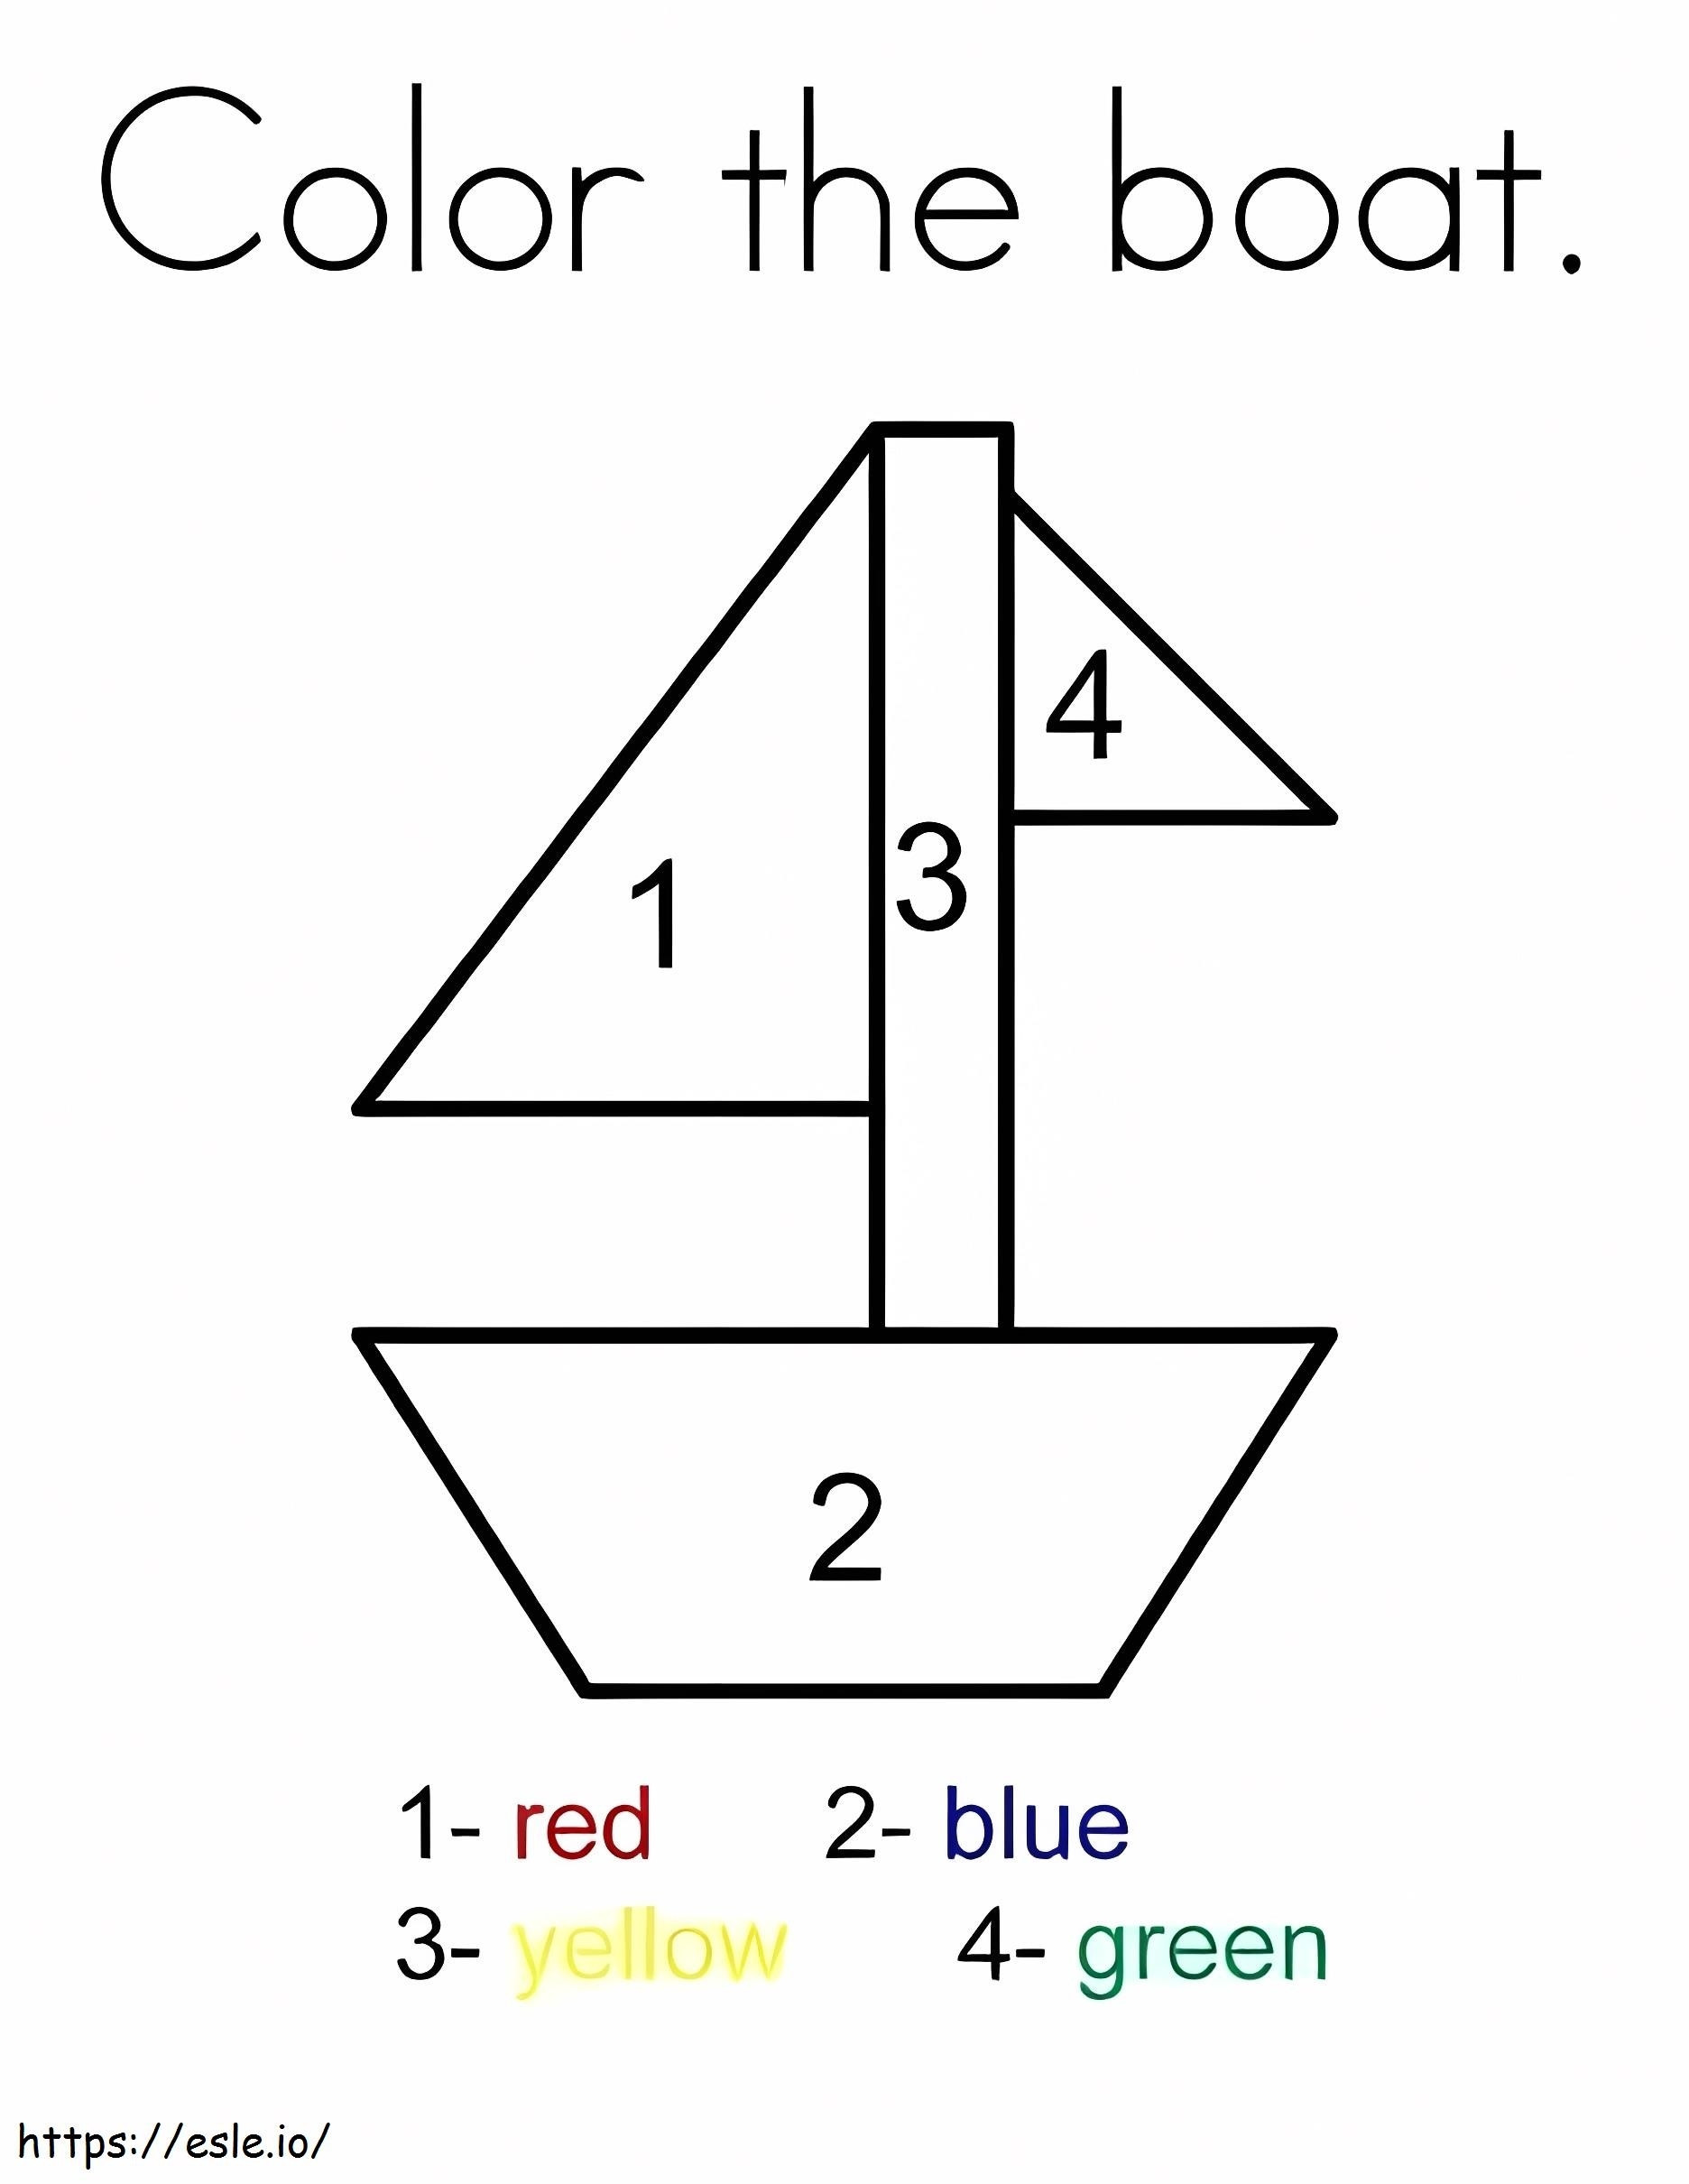 Simple Boat Color By Number coloring page